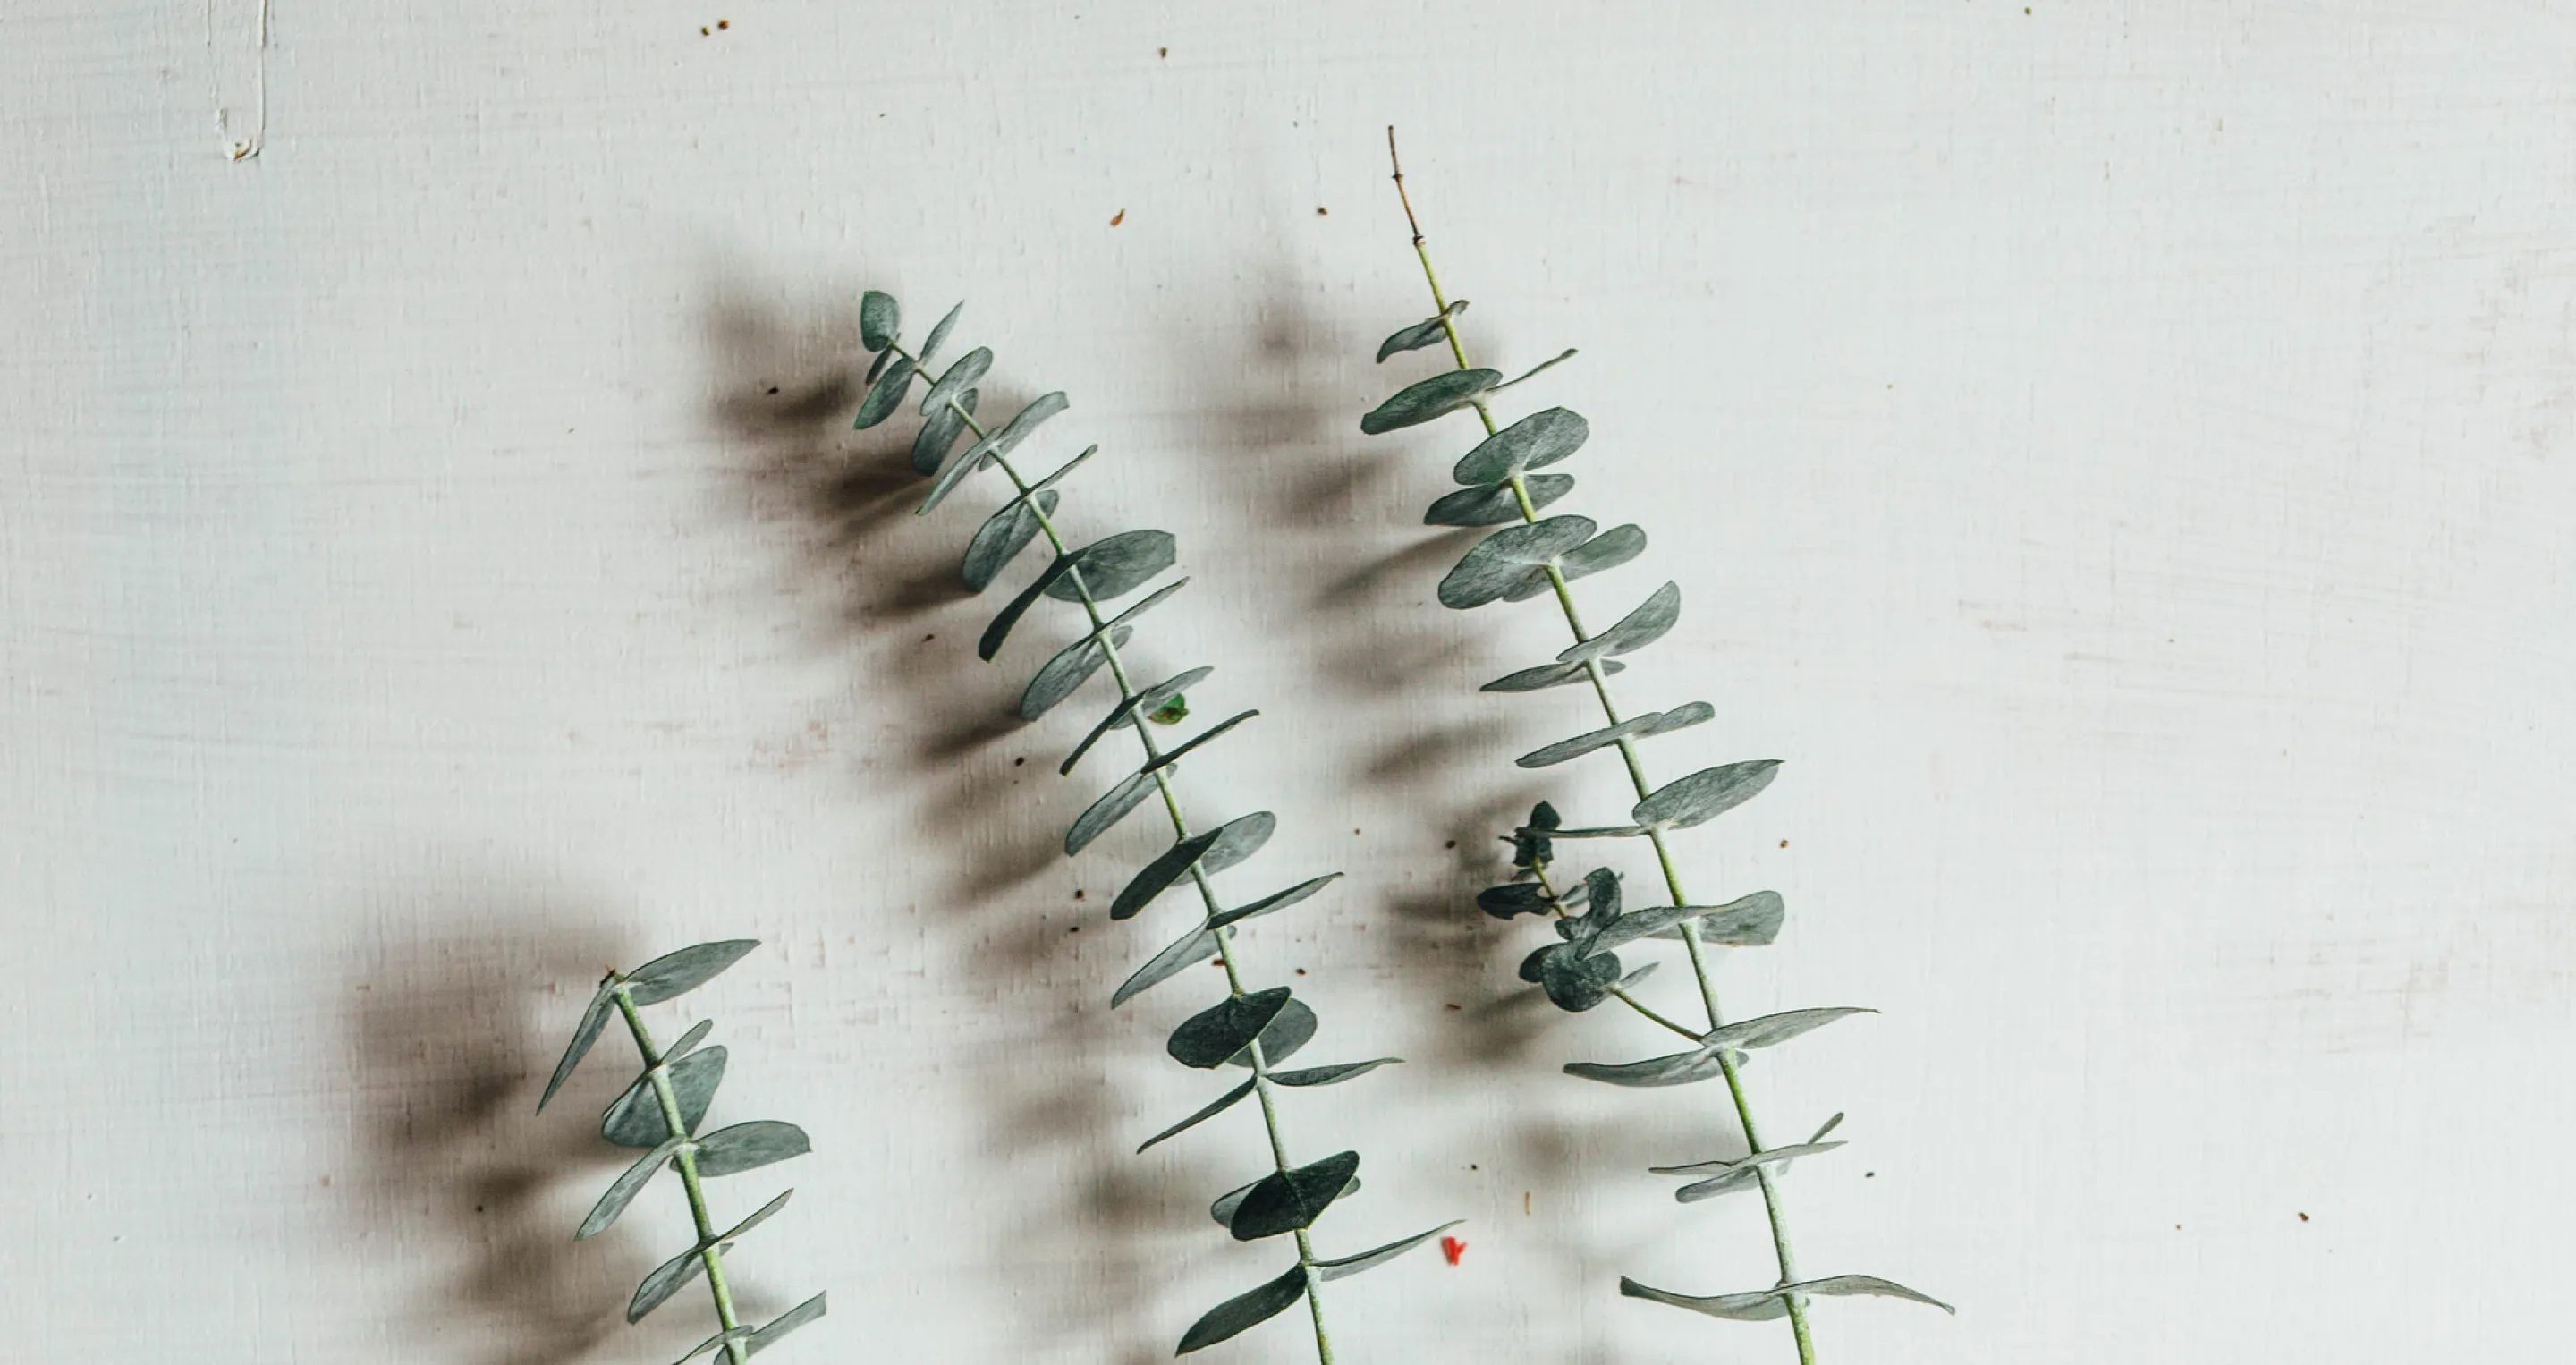 Four eucalyptus branches arranged on a white background with visible shadows.